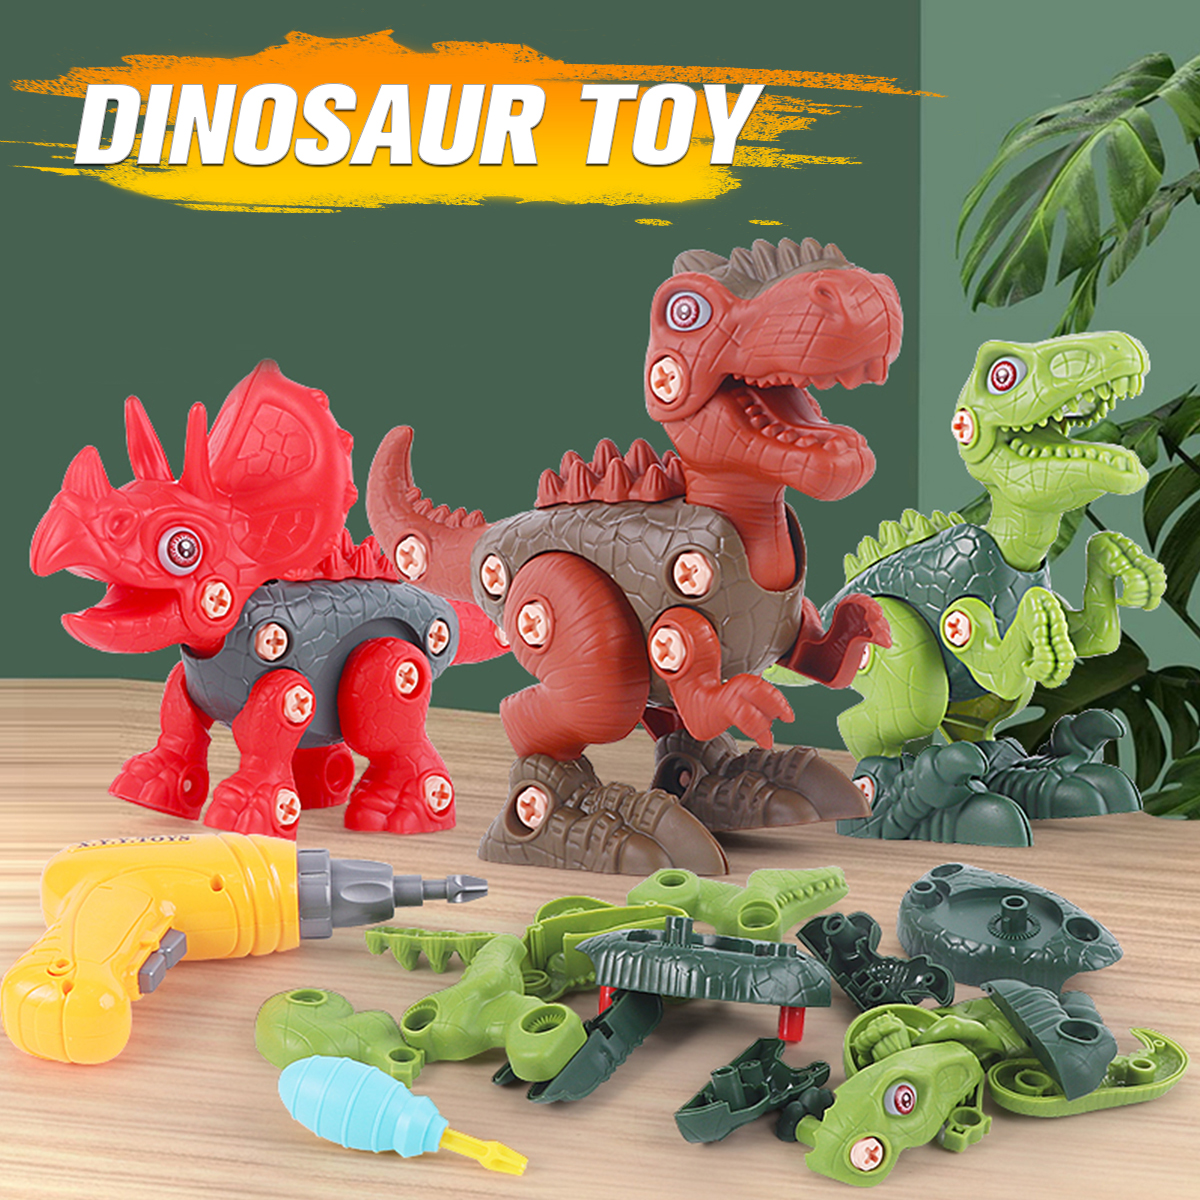 Realistic-Dinosaur-Model-Dino-Toy-Electric-Drill-Toy-Figures-Play-Set-Kids-Birthday-Christmas-Gifts-1784870-2